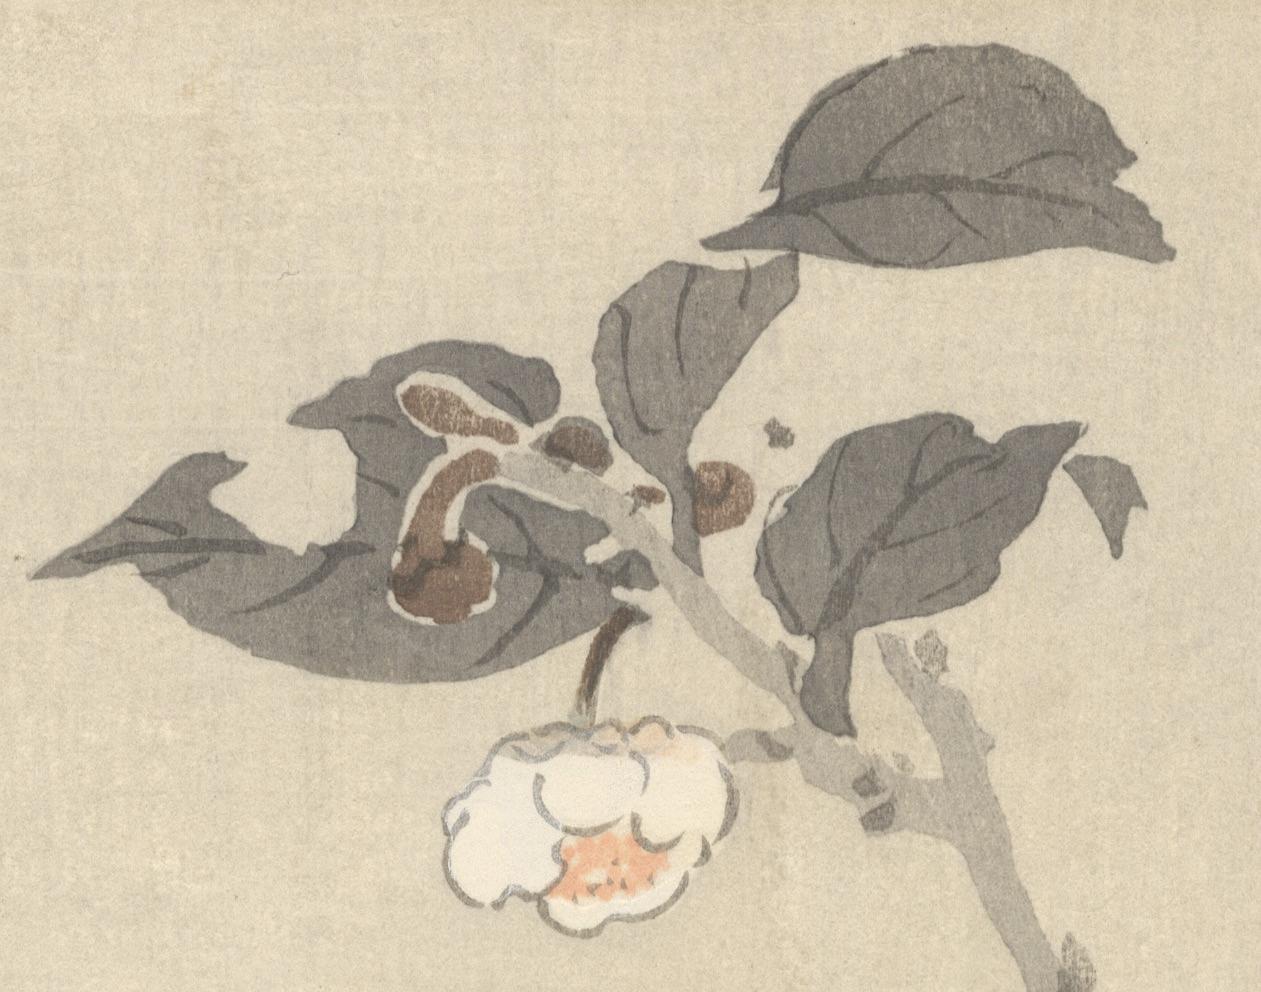 Artist: Koson Ohara (1877-1945)
Title: Bunting Perched on a Camellia Branch
Publisher: Daikoku-ya
Date: Late 19th century
Dimensions: 18.8 x 37.1 cm
Condition: Slight discolouration around the margins, tape and paper residue on the back from the